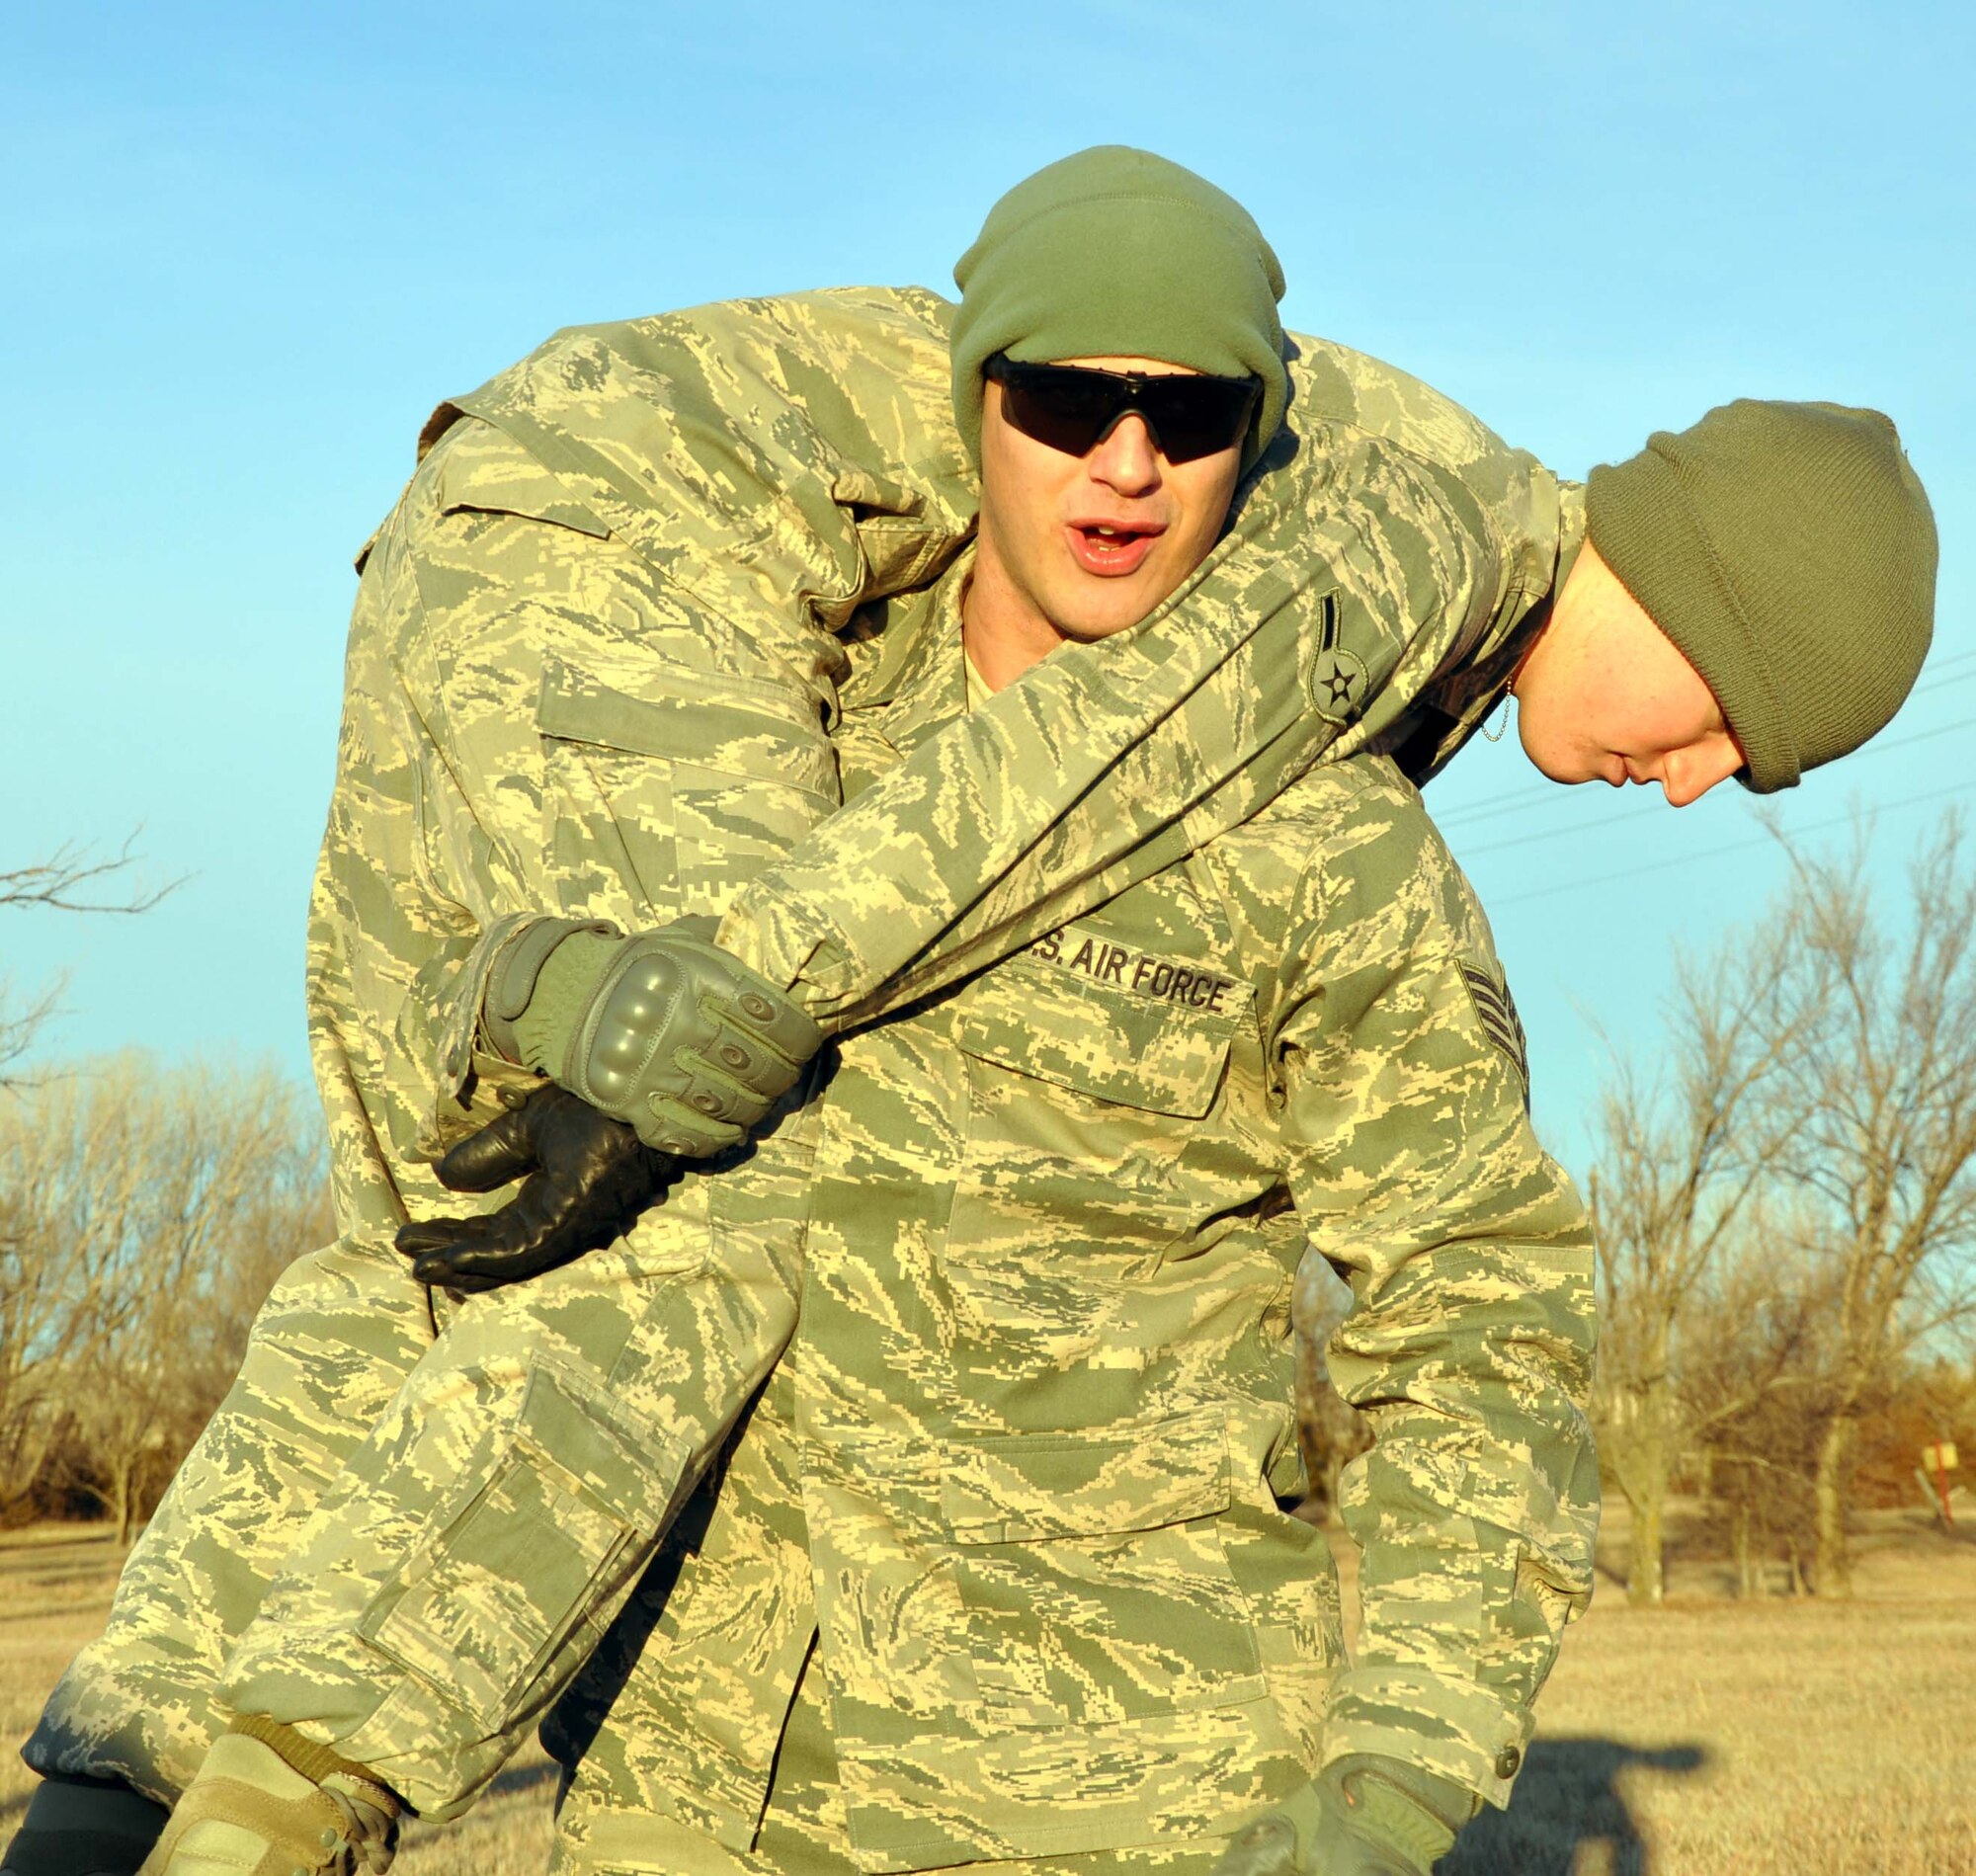 Staff Sgt. Dustin Wileman, 931st Security Forces Squadron, displays the proper technique for conducting a fireman's carry, Jan. 7, 2012.  The 931st SFS spent the morning running through a combat fitness test, which incorporated movements that would be required in battlefield scenarios, such as the fireman's carry to evacuate casualties.  (U.S. Air Force photo by 1st Lt. Zach Anderson)